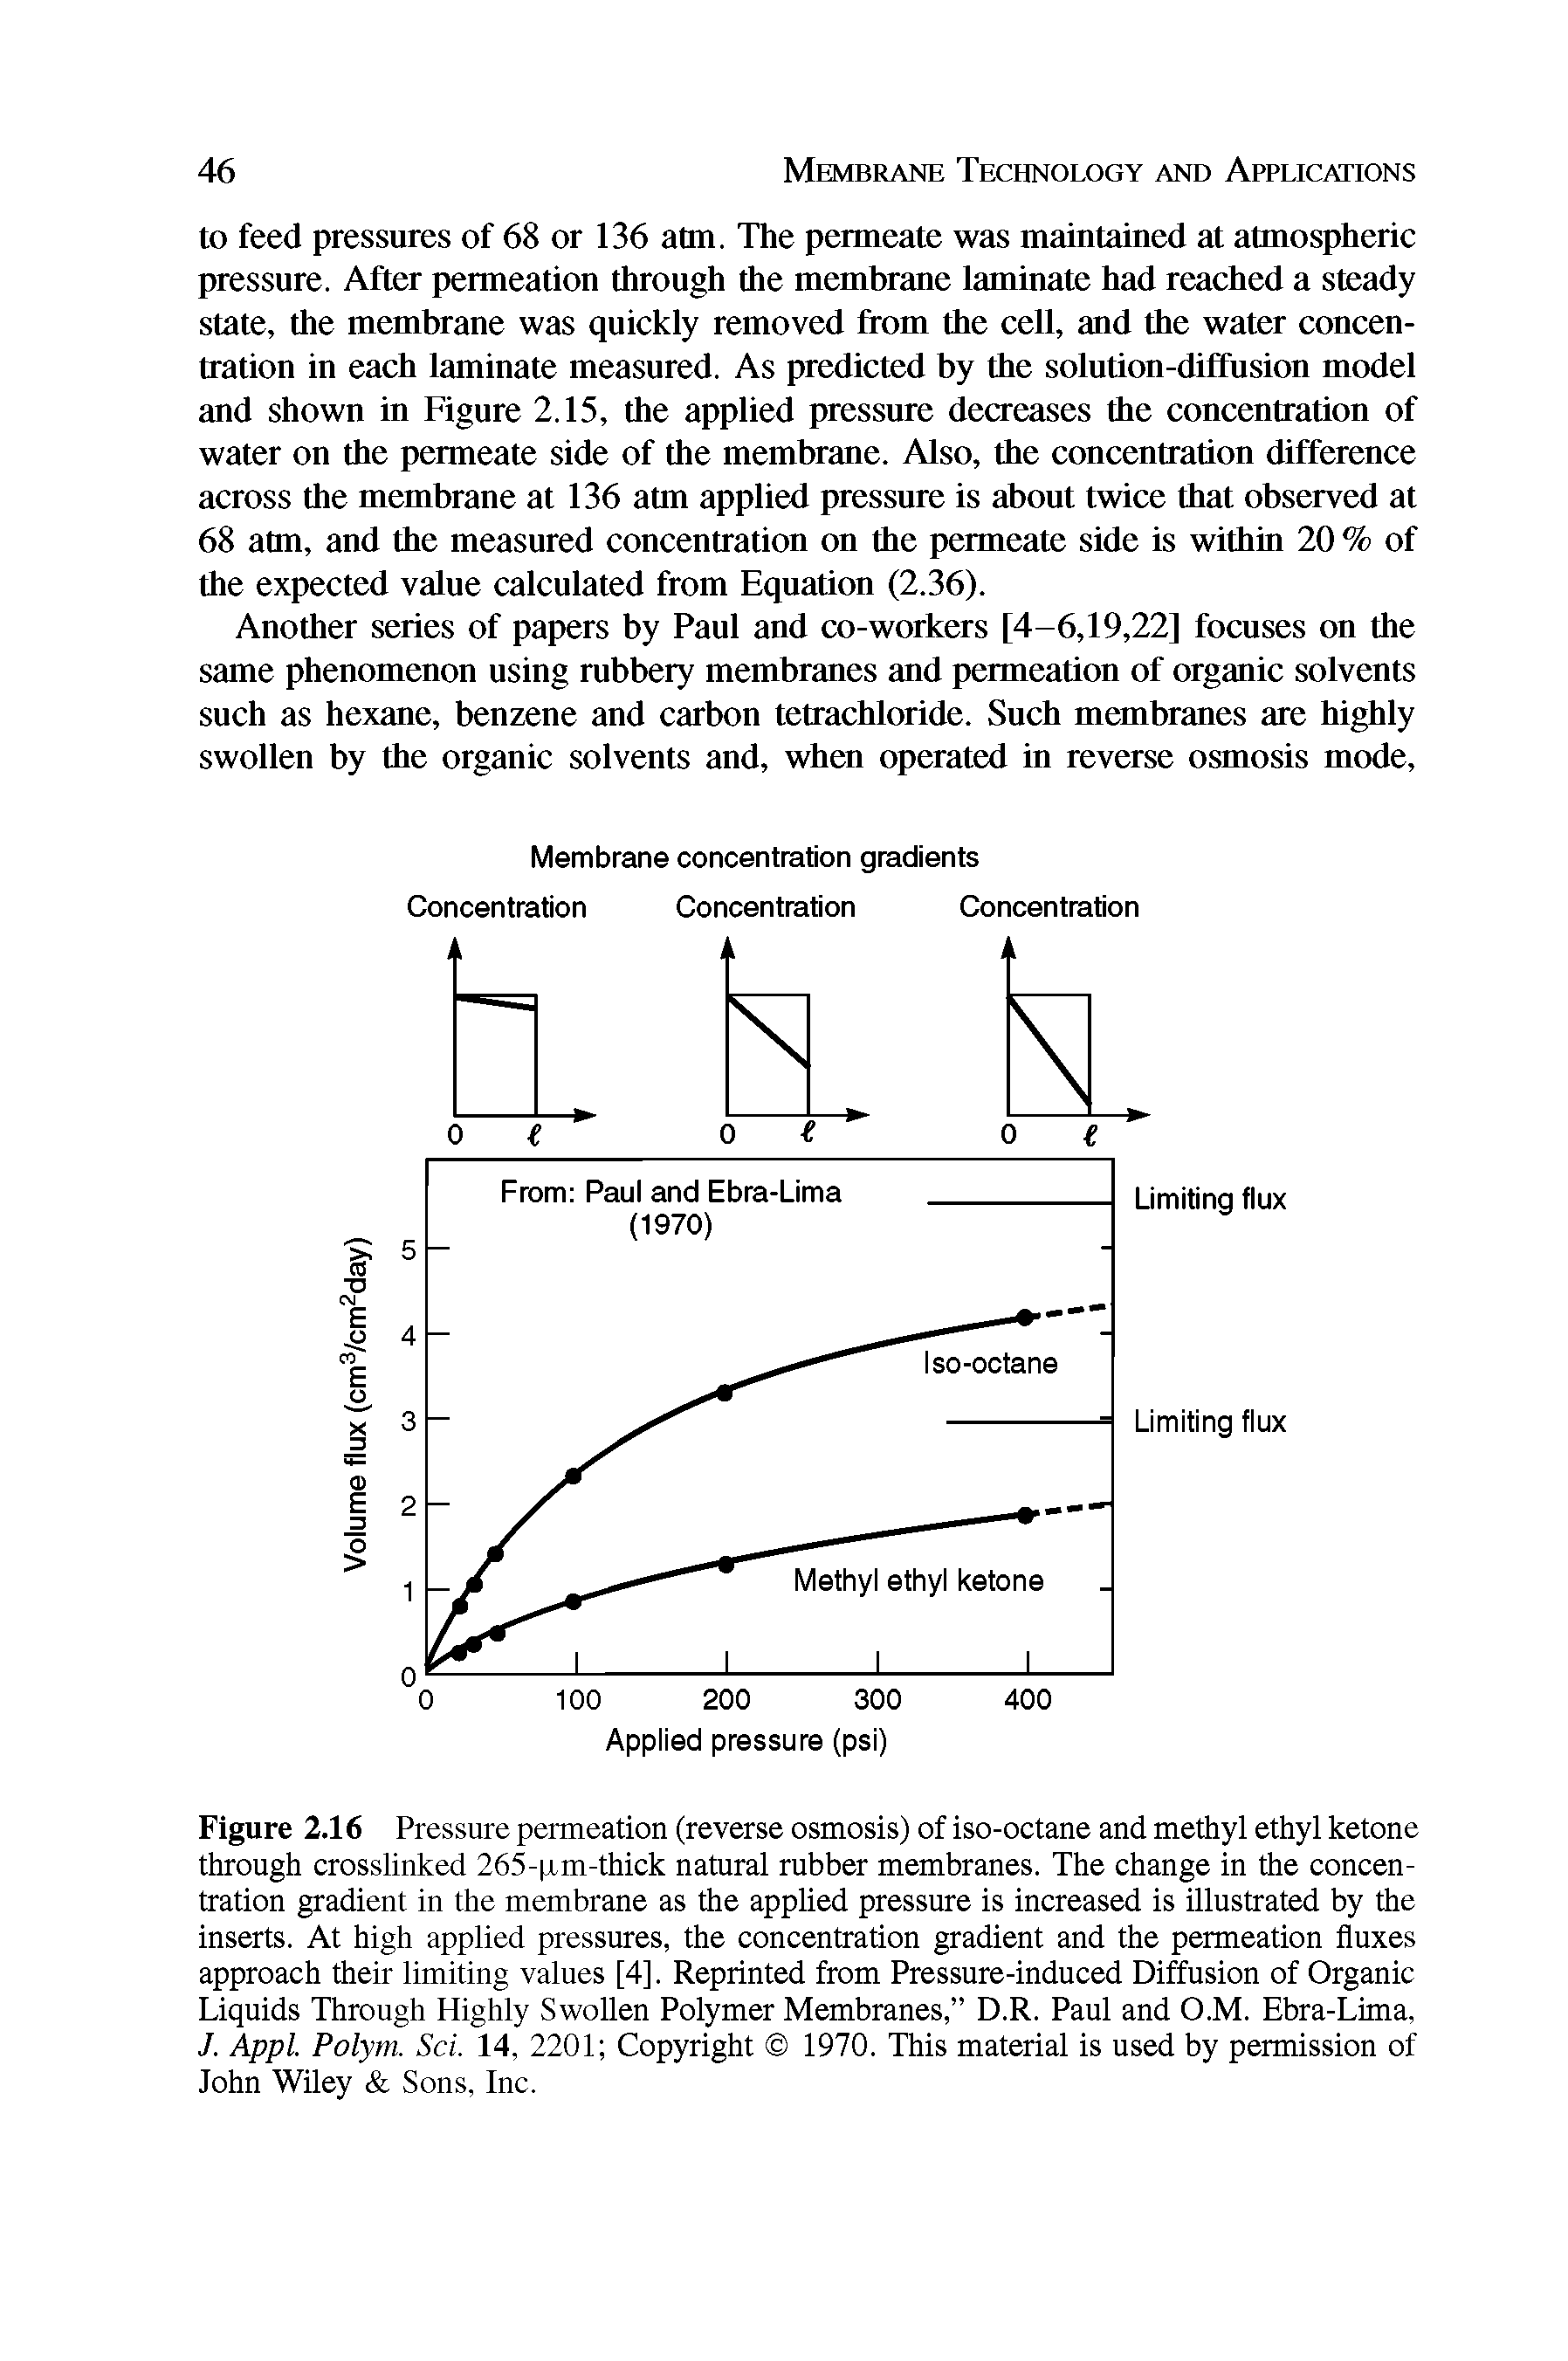 Figure 2.16 Pressure permeation (reverse osmosis) of iso-octane and methyl ethyl ketone through crosslinked 265-p.m-thick natural rubber membranes. The change in the concentration gradient in the membrane as the applied pressure is increased is illustrated by the inserts. At high applied pressures, the concentration gradient and the permeation fluxes approach their limiting values [4]. Reprinted from Pressure-induced Diffusion of Organic Liquids Through Highly Swollen Polymer Membranes, D.R. Paul and O.M. Ebra-Lima, J. Appl. Polym. Sci. 14, 2201 Copyright 1970. This material is used by permission of John Wiley Sons, Inc.